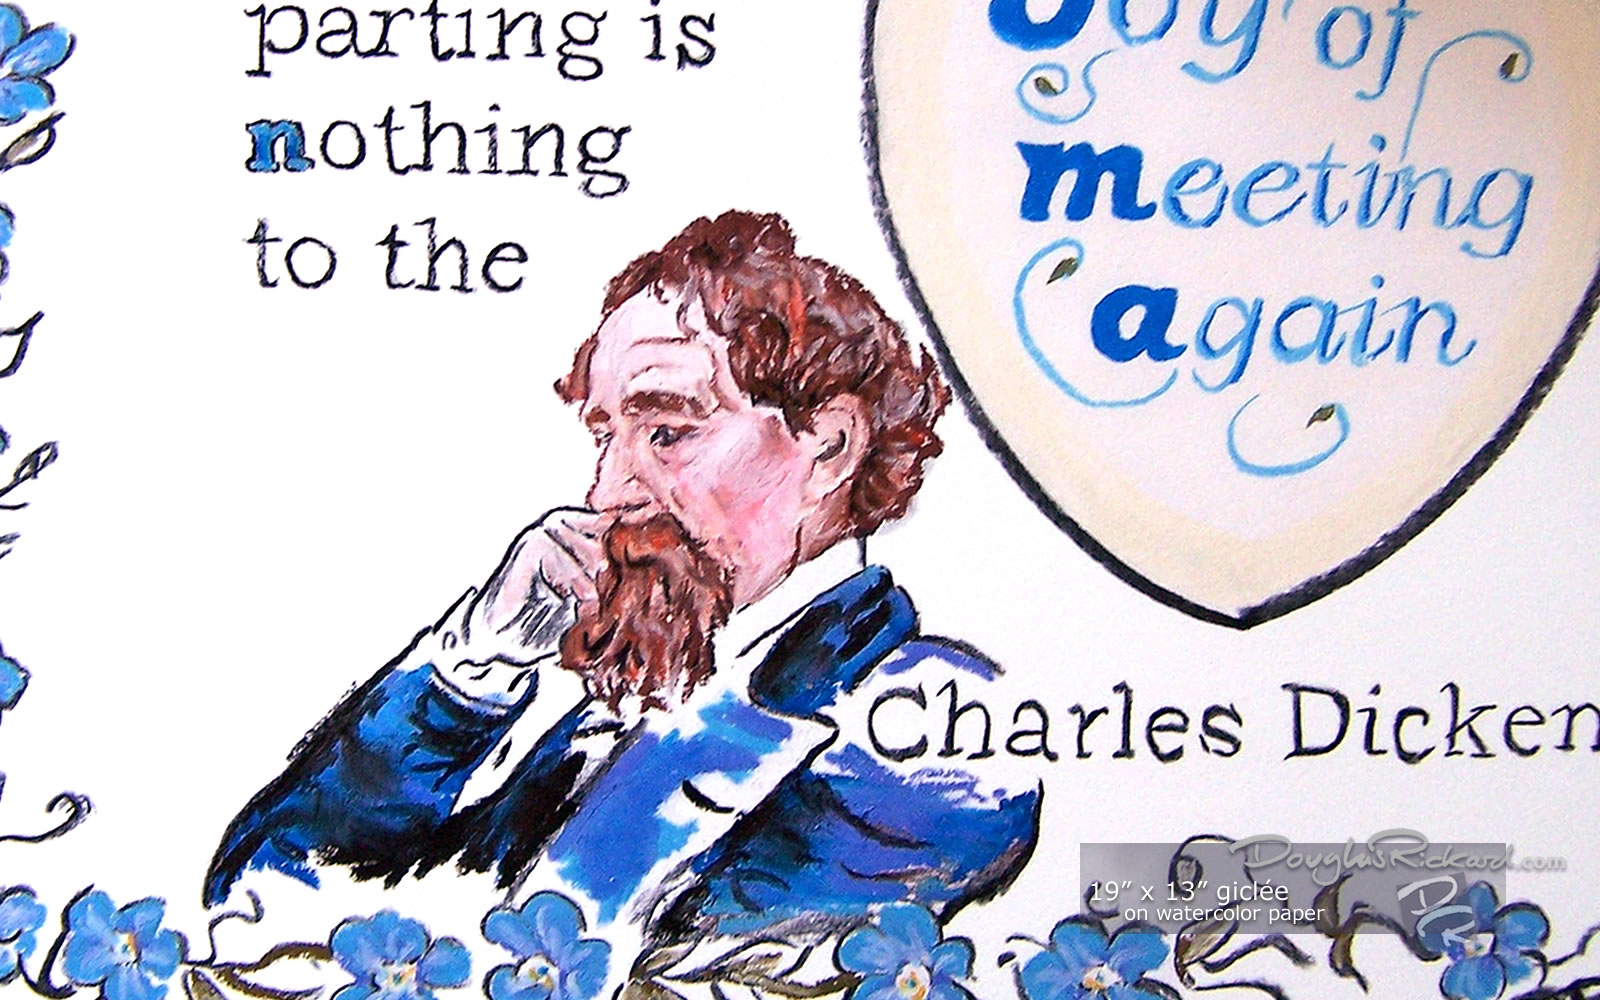 Charles Dickens's quote #1